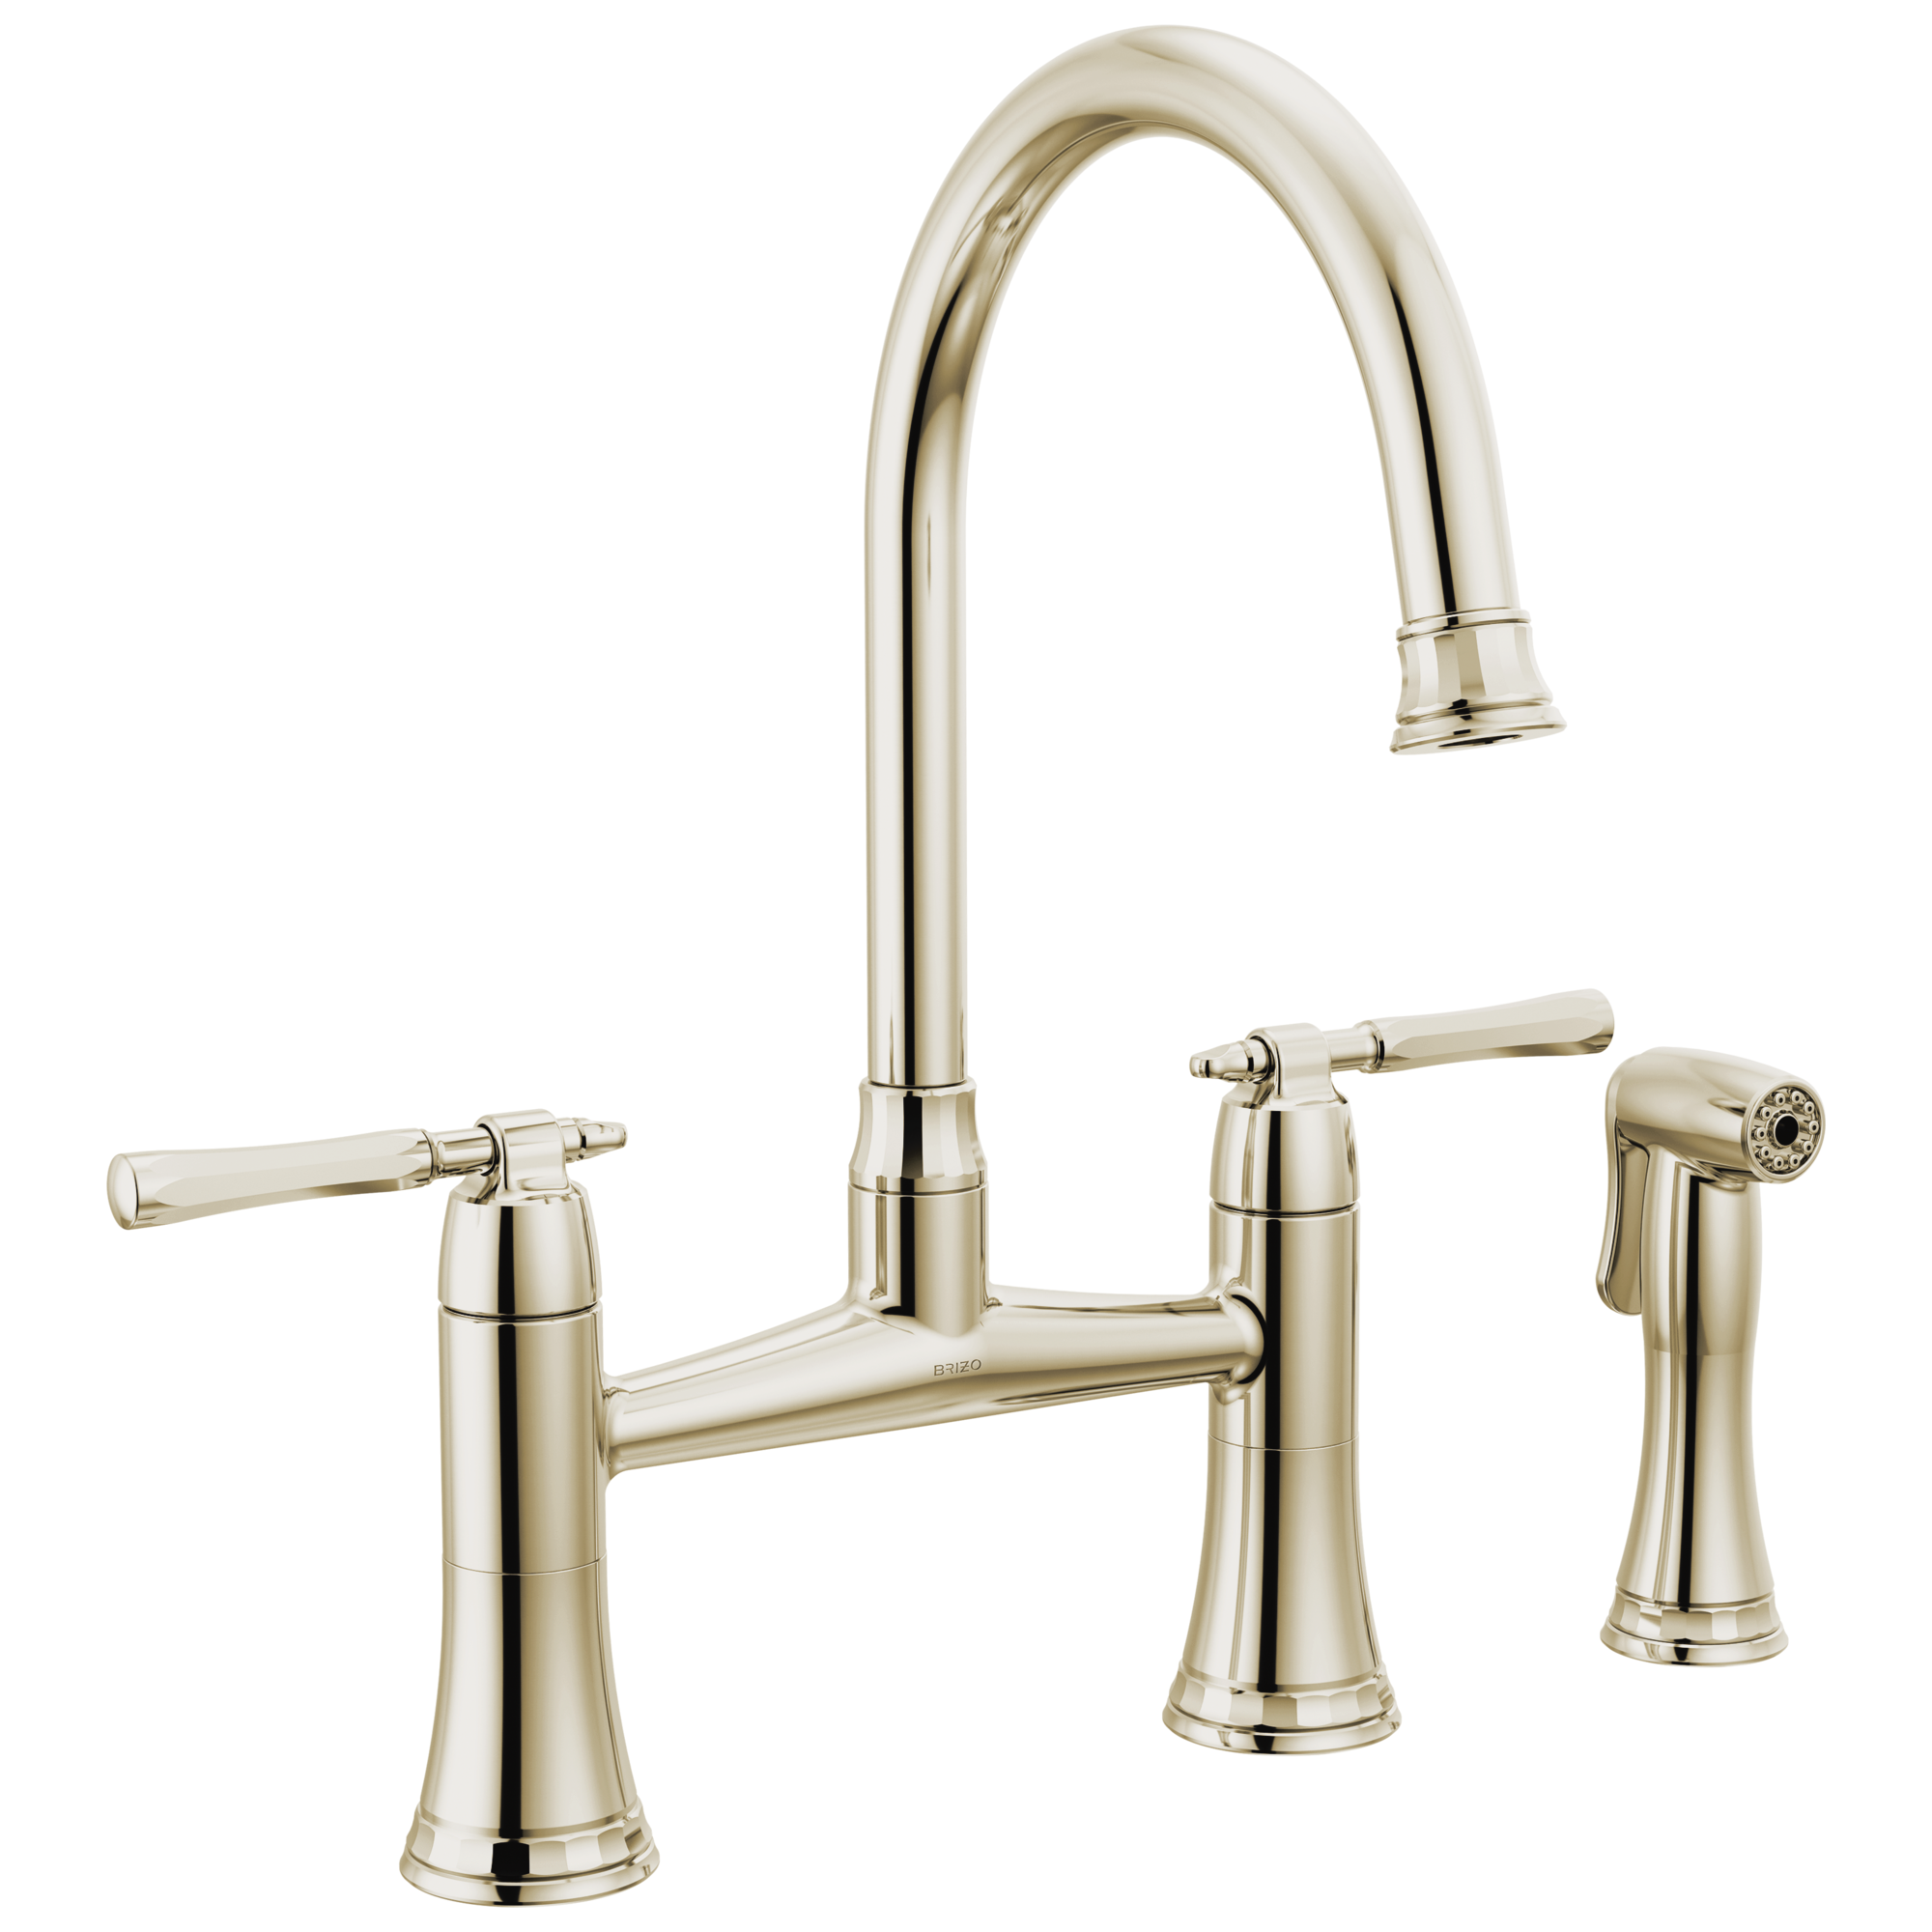 Brizo The Tulham Kitchen Collection by Brizo Bridge Kitchen Faucet with Side Spray